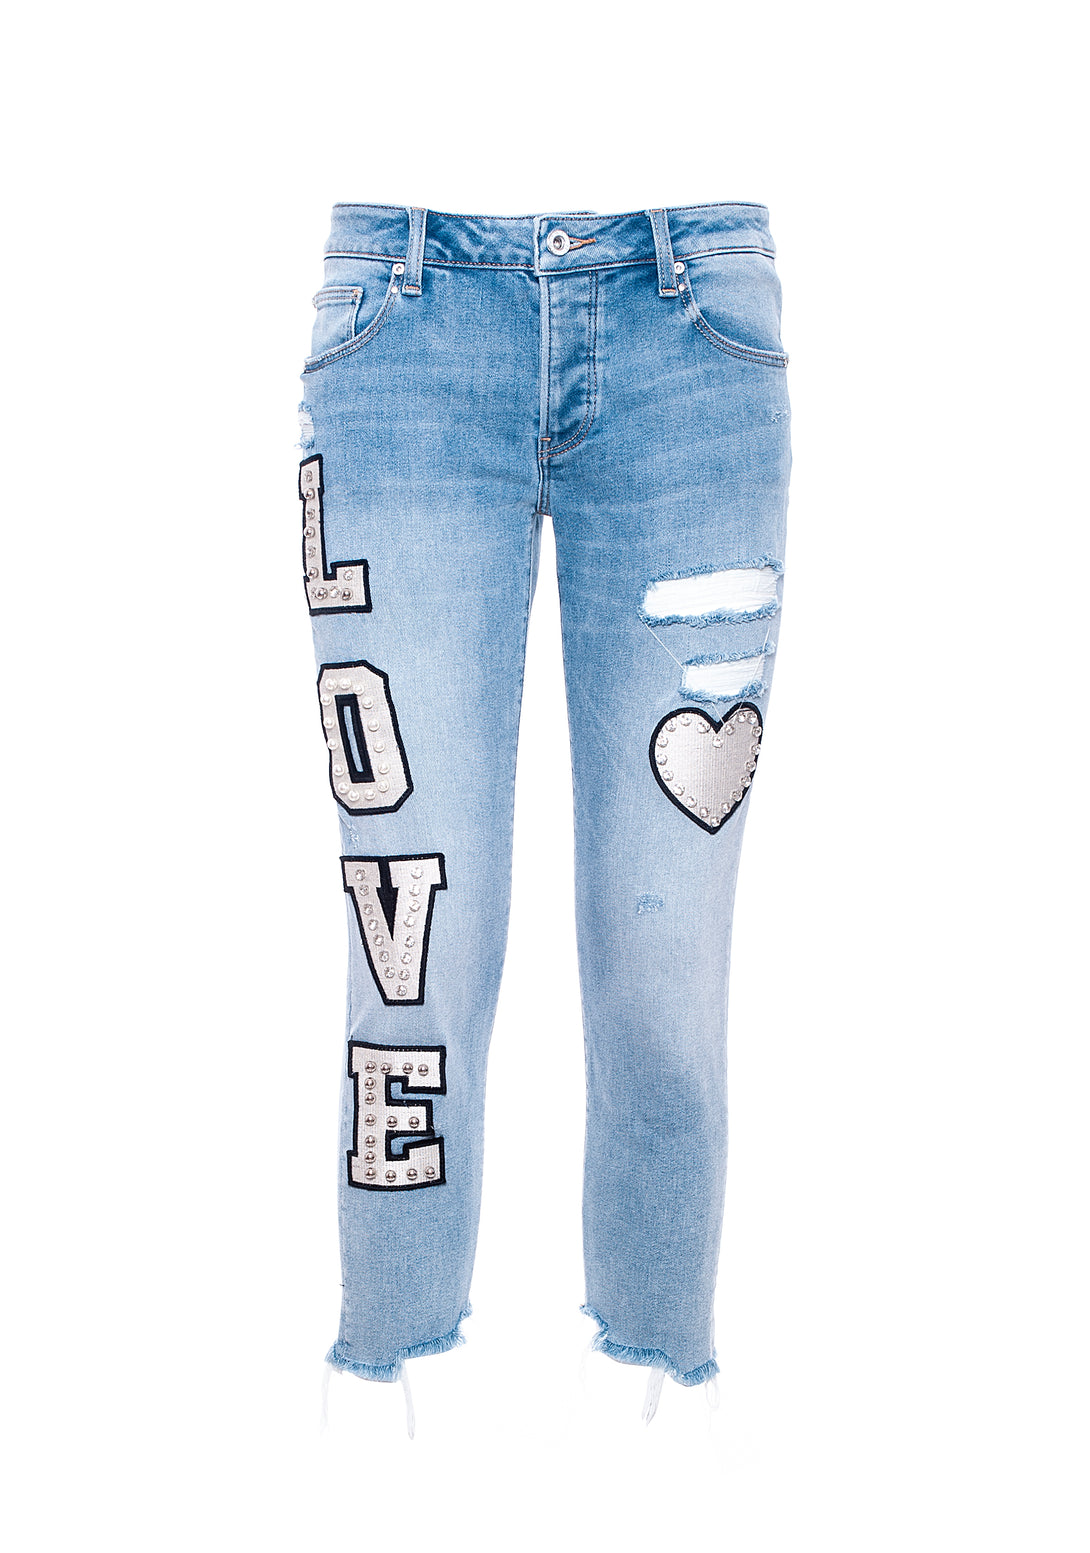 Jeans boyfriend cropped fit made in denim with light wash and patches